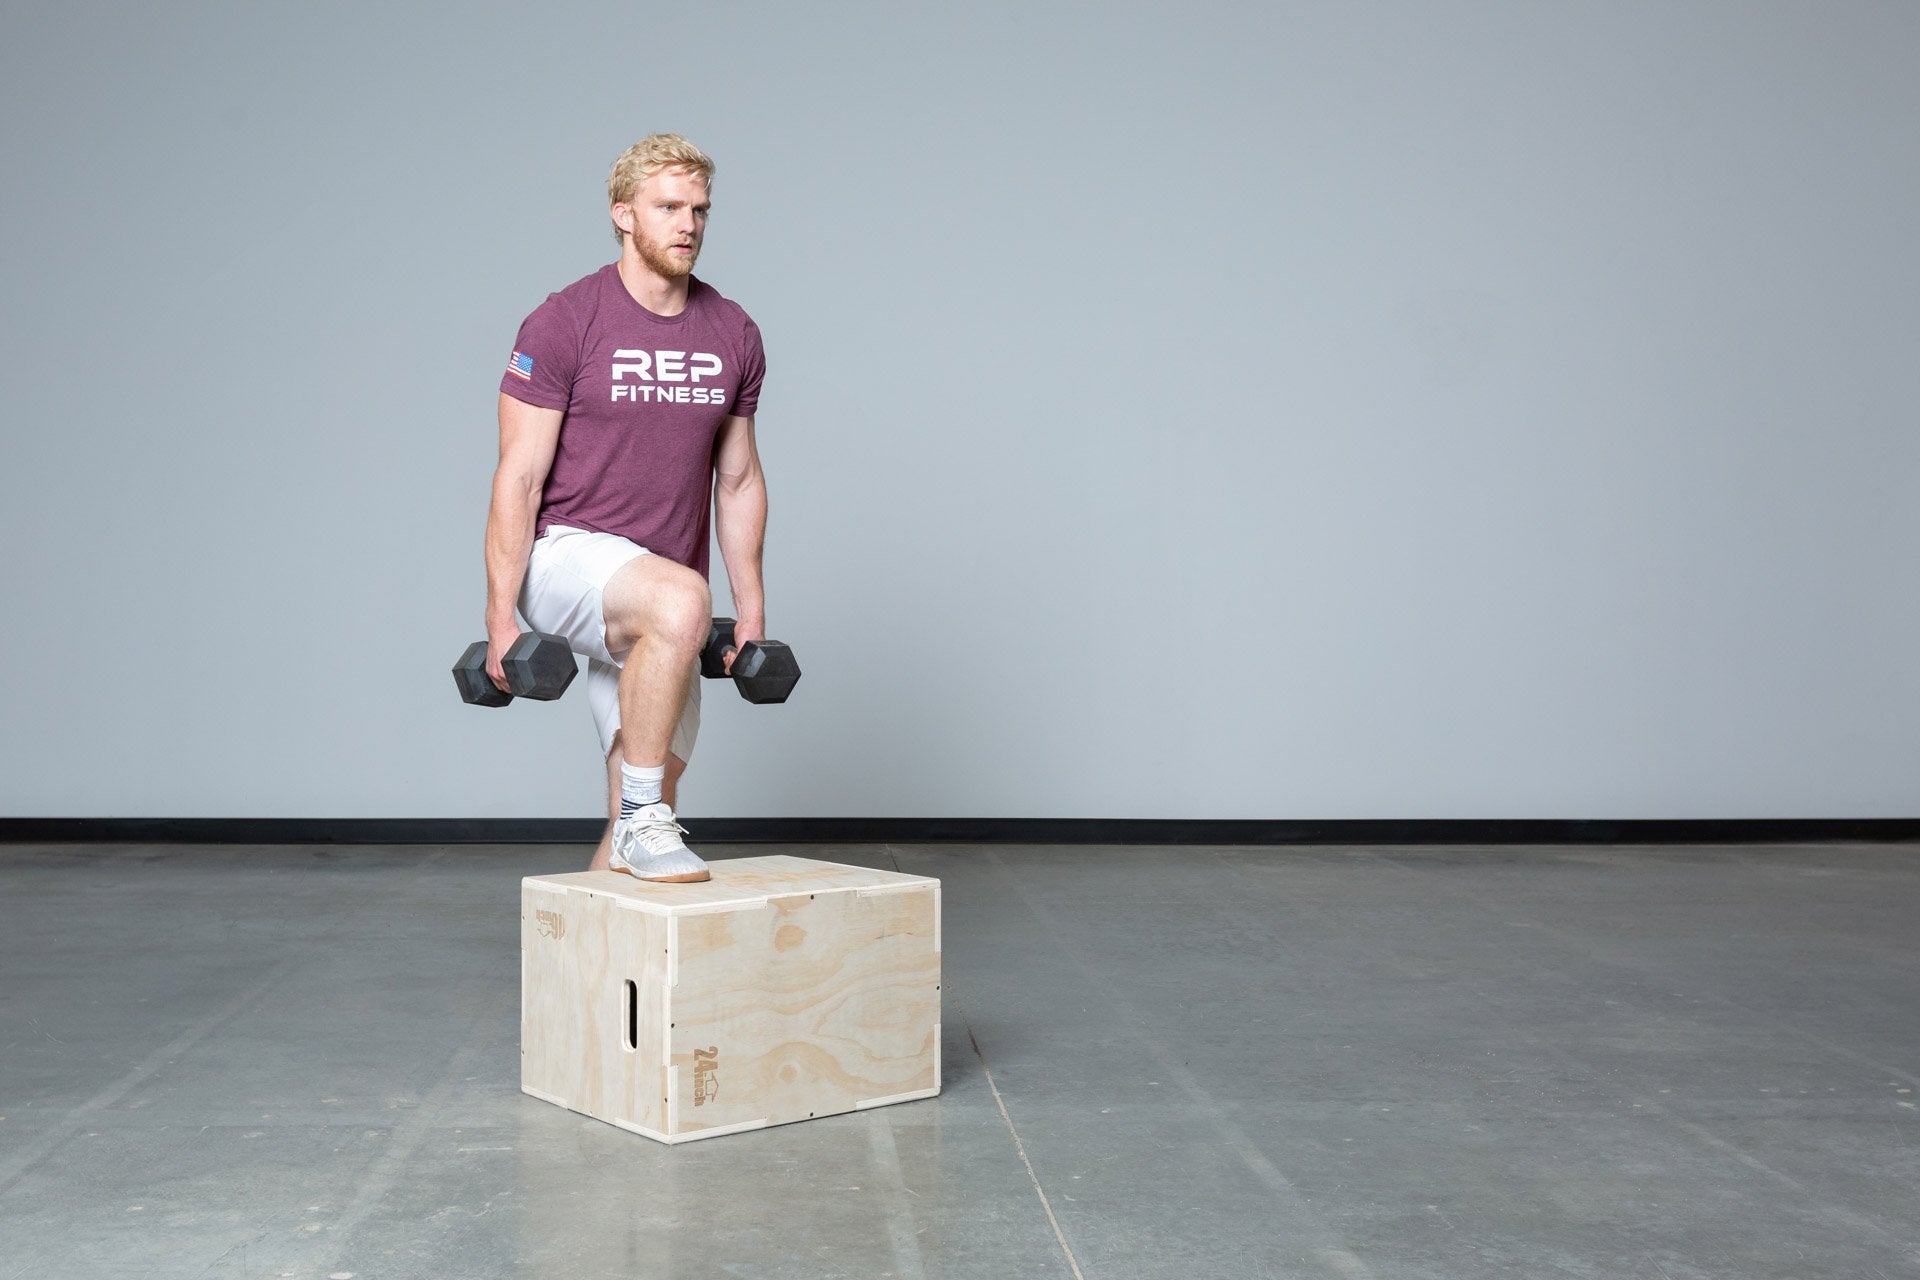 Lifter performing weighted step-ups on a Medium REP 3-in-1 Wood Plyo Box.